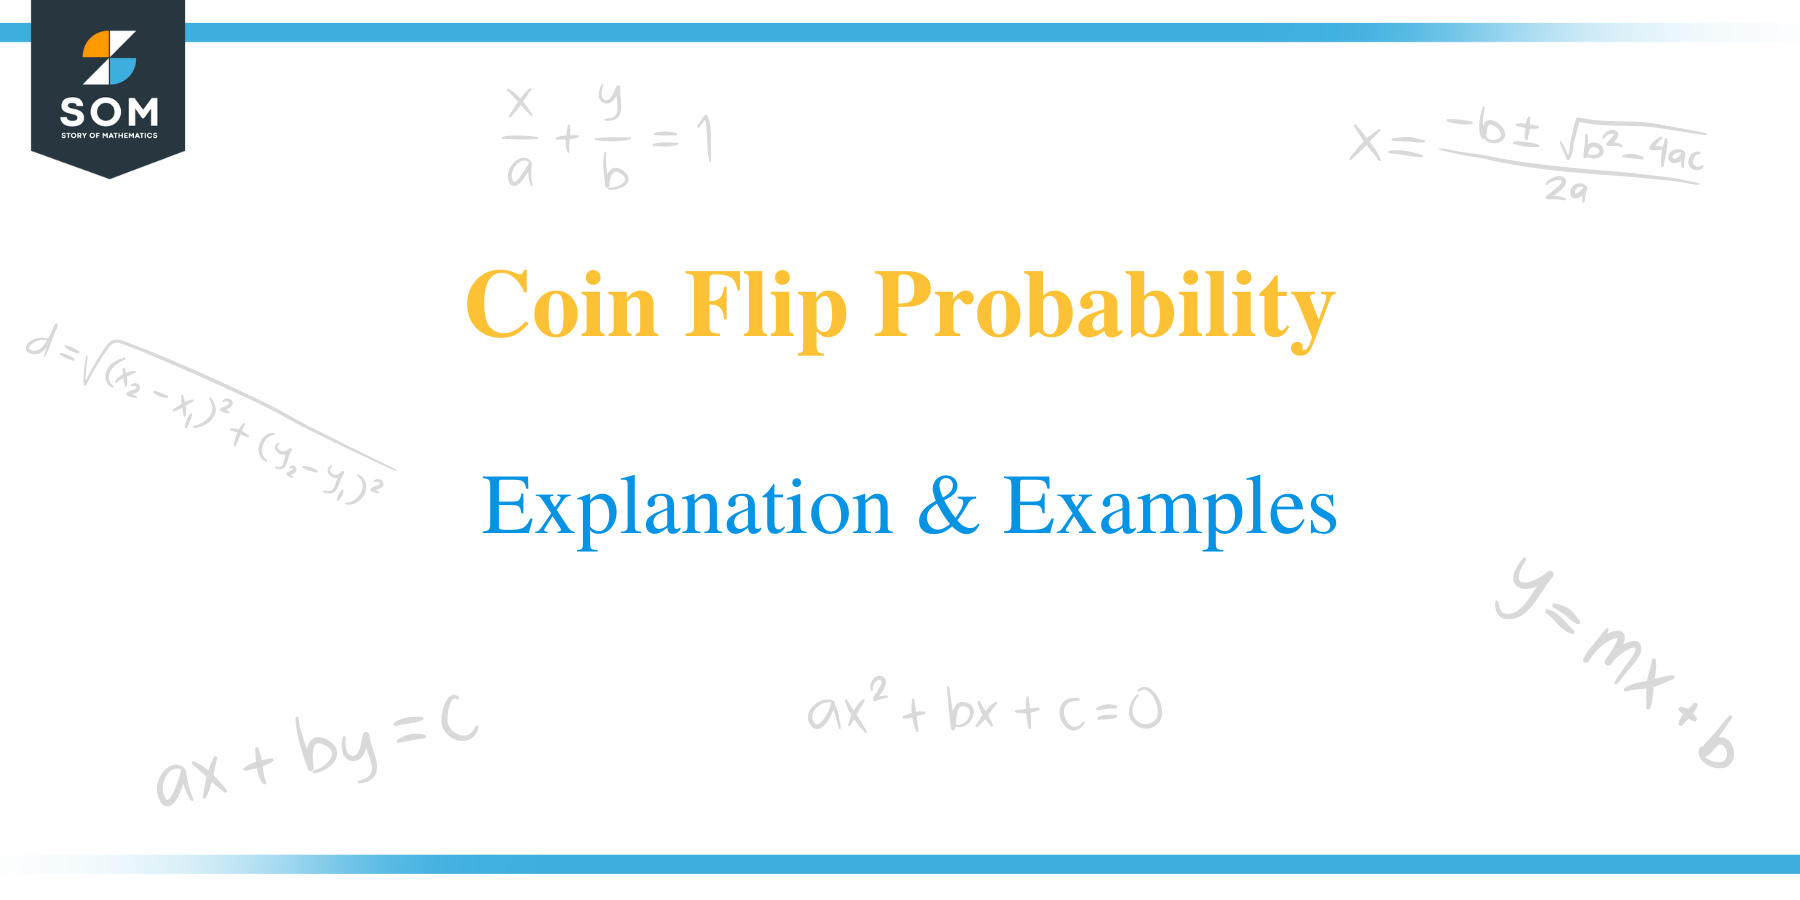 Coin Flip Probability Title